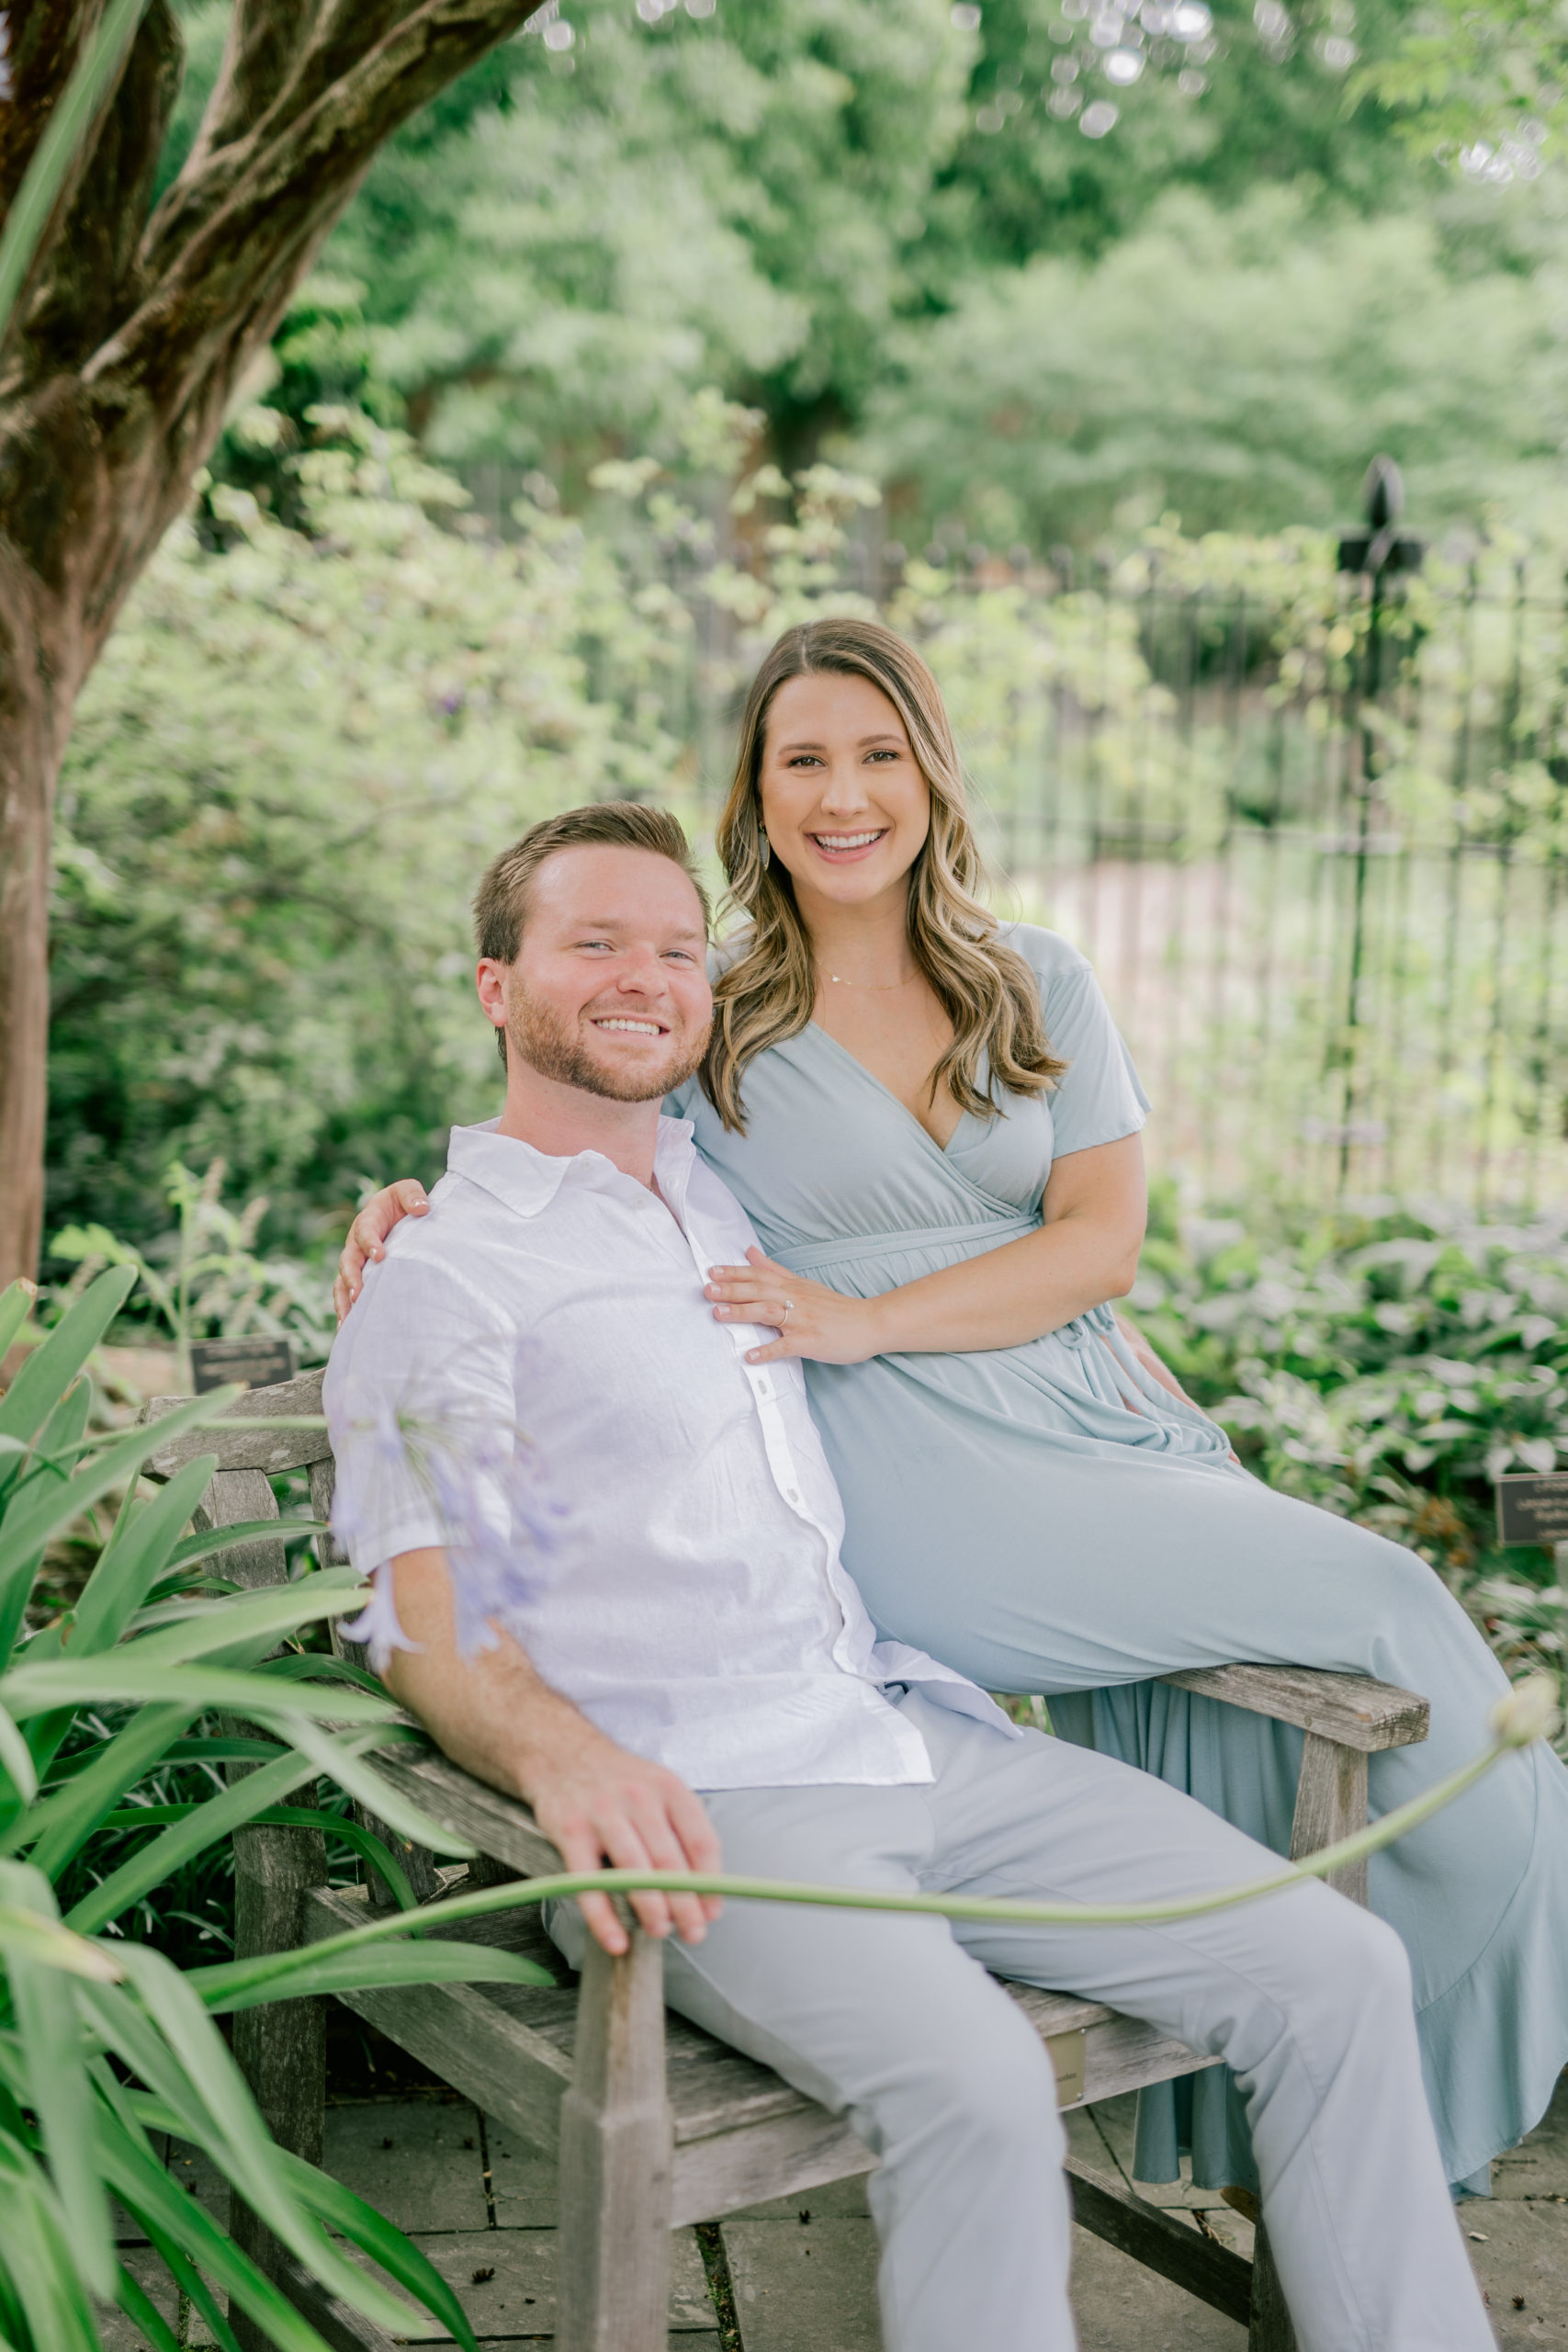 Couple sitting on a chair in a garden - Lewis Ginter Botanical Garden Engagement Session - Garden Engagement Session